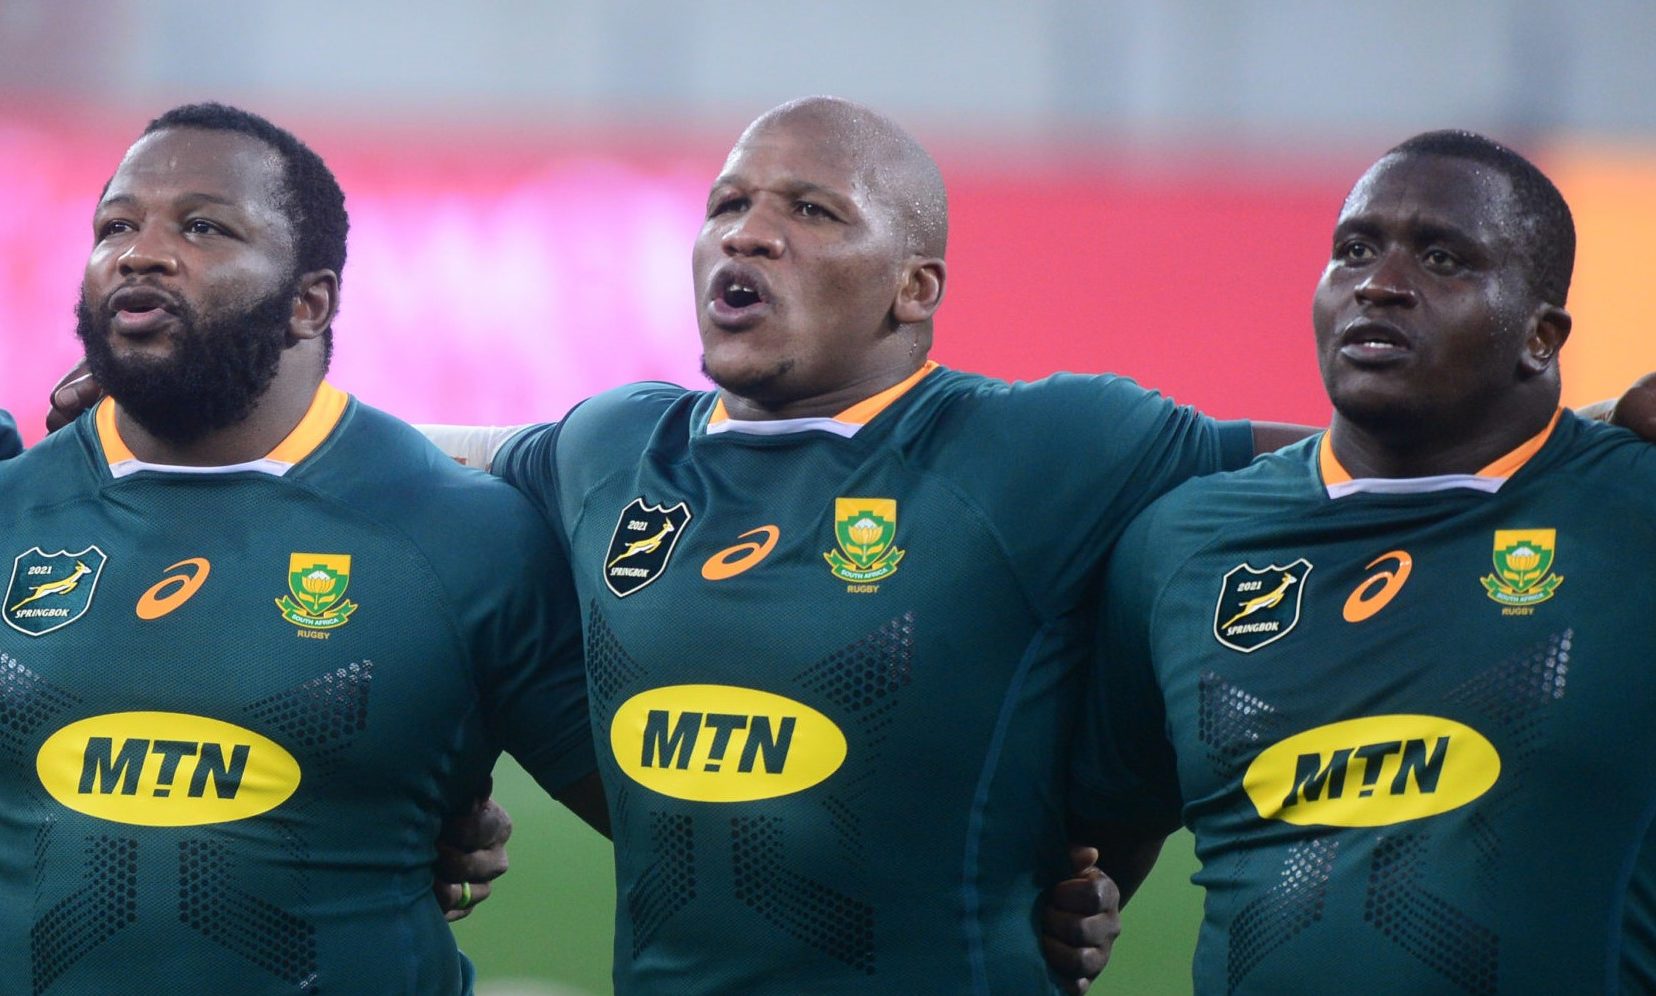 Siya Kolisi (captain), Ox Nche, Mbongeni Mbonambi and Trevor Nyakane of South Africa sing national anthem before the 2021 British and Irish Lions Tour first test between South Africa and BI Lions at Cape Town Stadium on 24 July 2021 ©Ryan Wilkisky/BackpagePix